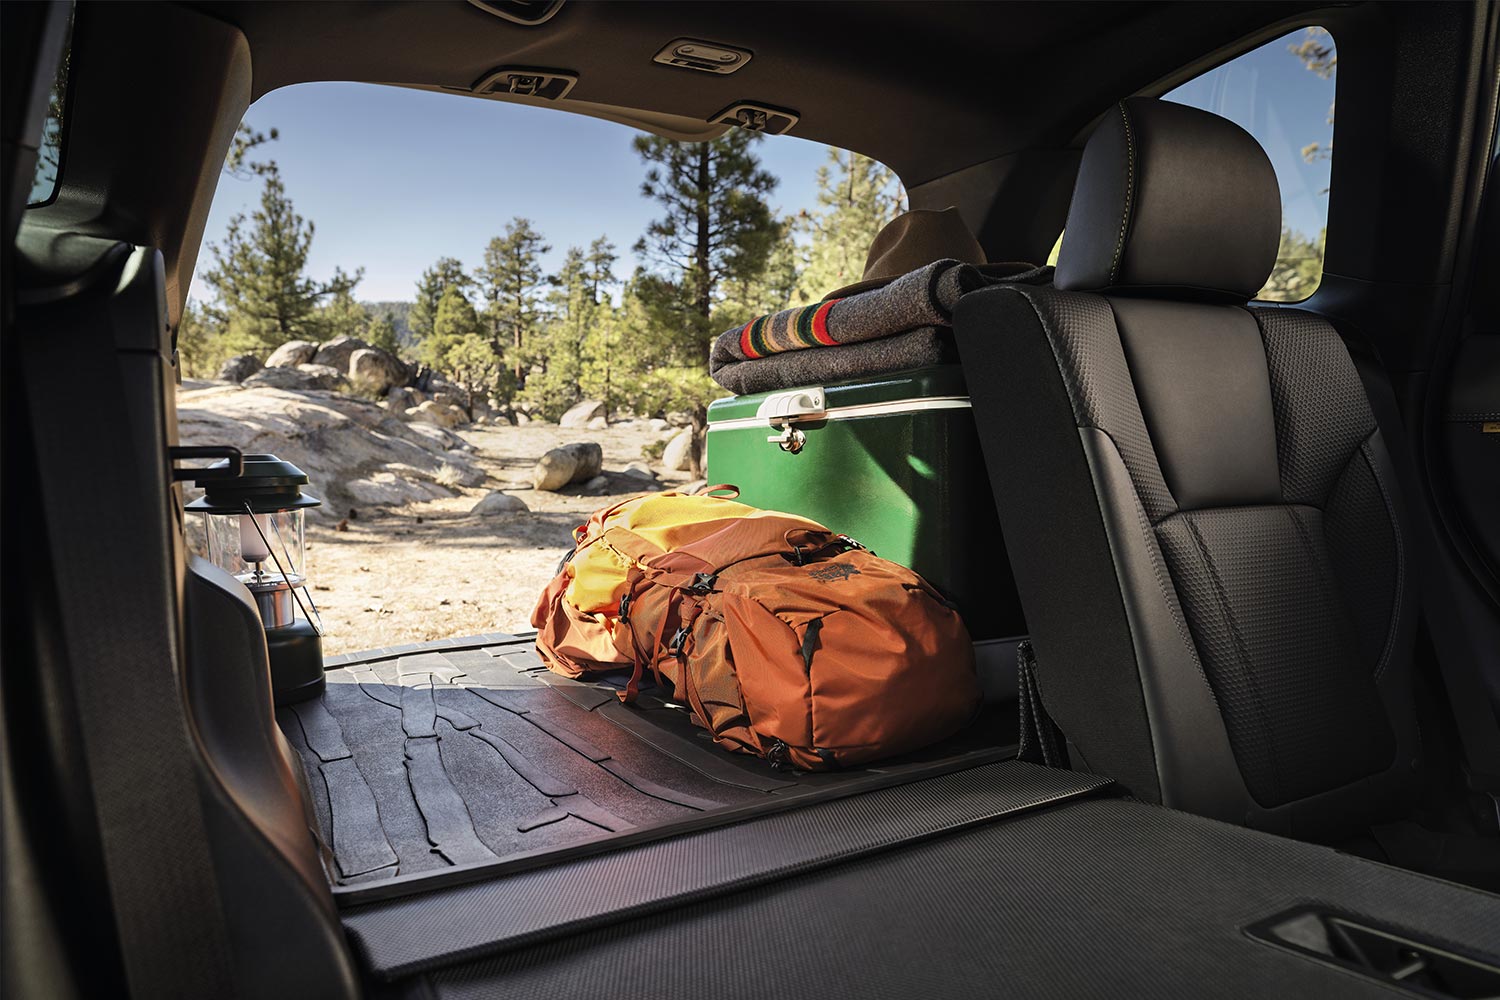 The cargo area of the Subaru Forester Wilderness 